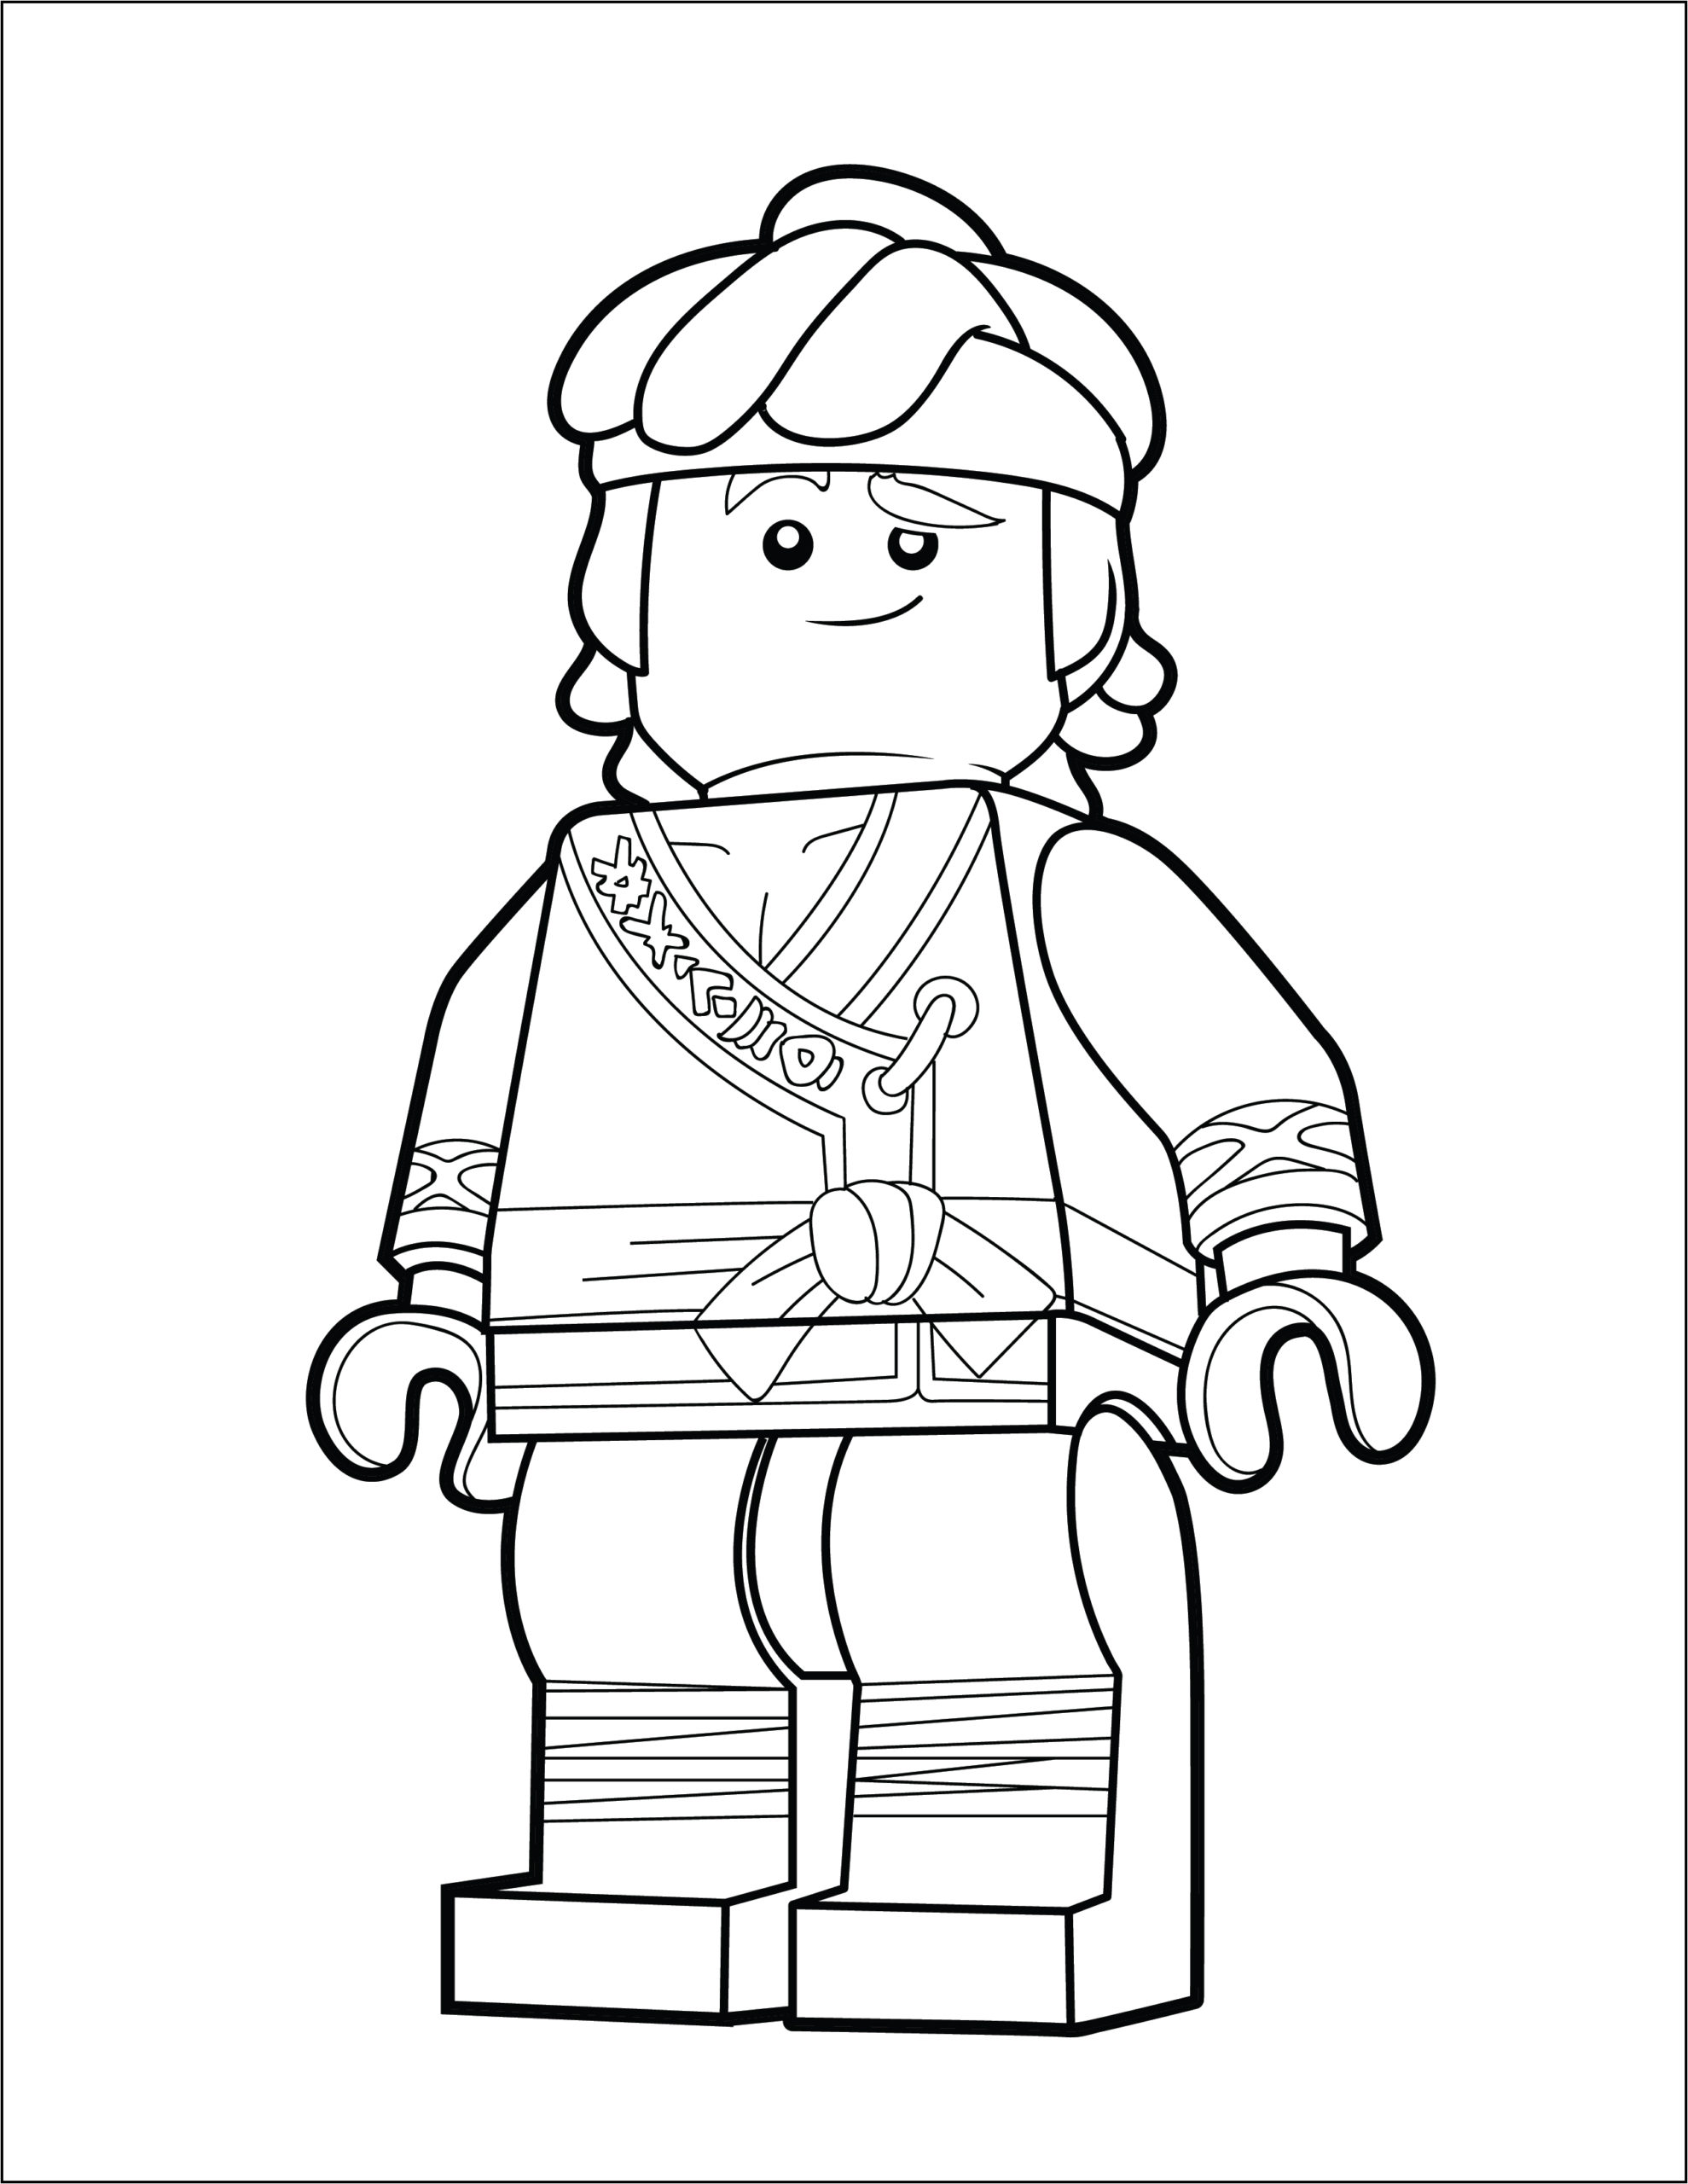 coloring pages : Cole Ninjago Coloring Pages Picture Ideas Free For Kids  Lego To Print Movie 64 Ninjago Coloring Pages Cole Picture Ideas ~  mommaonamissioninc